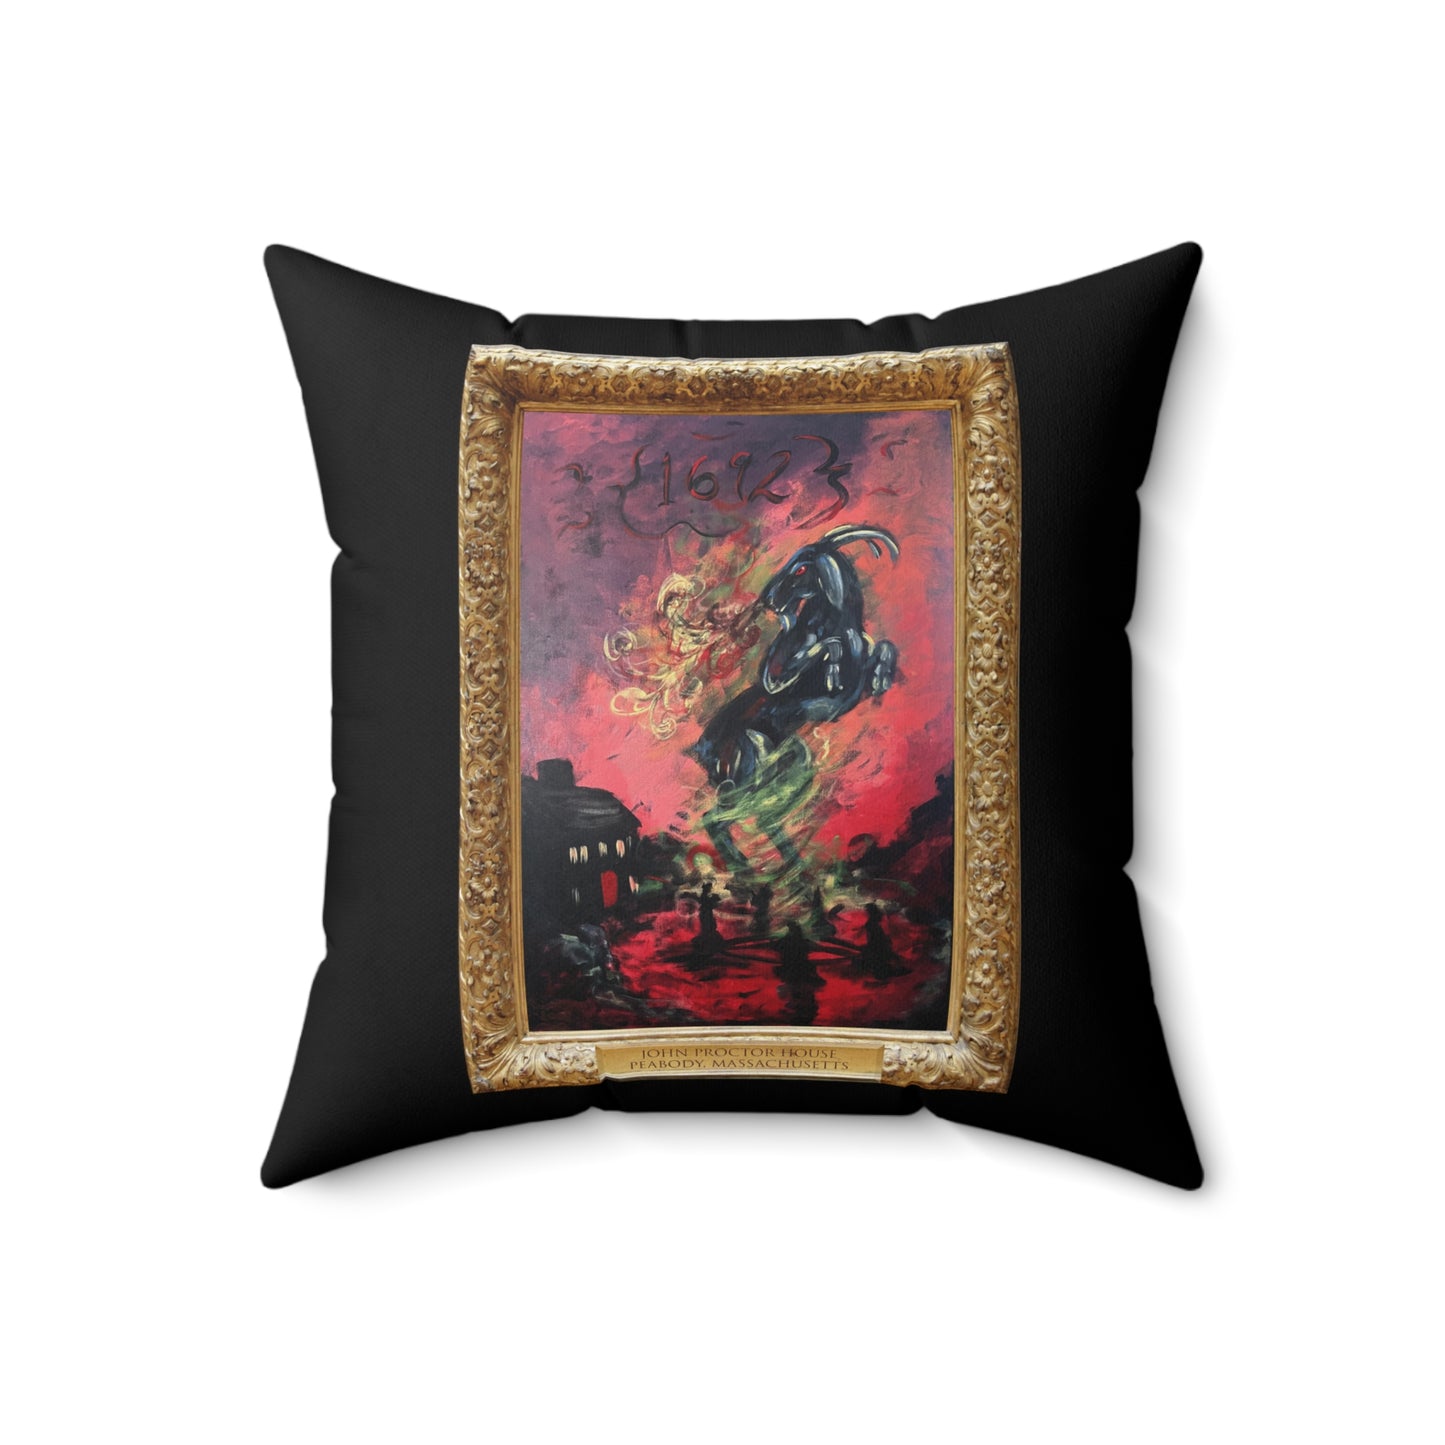 Scared & Alone Richard-Lael's "The Proctor House" Gallery Cloth Square Pillow